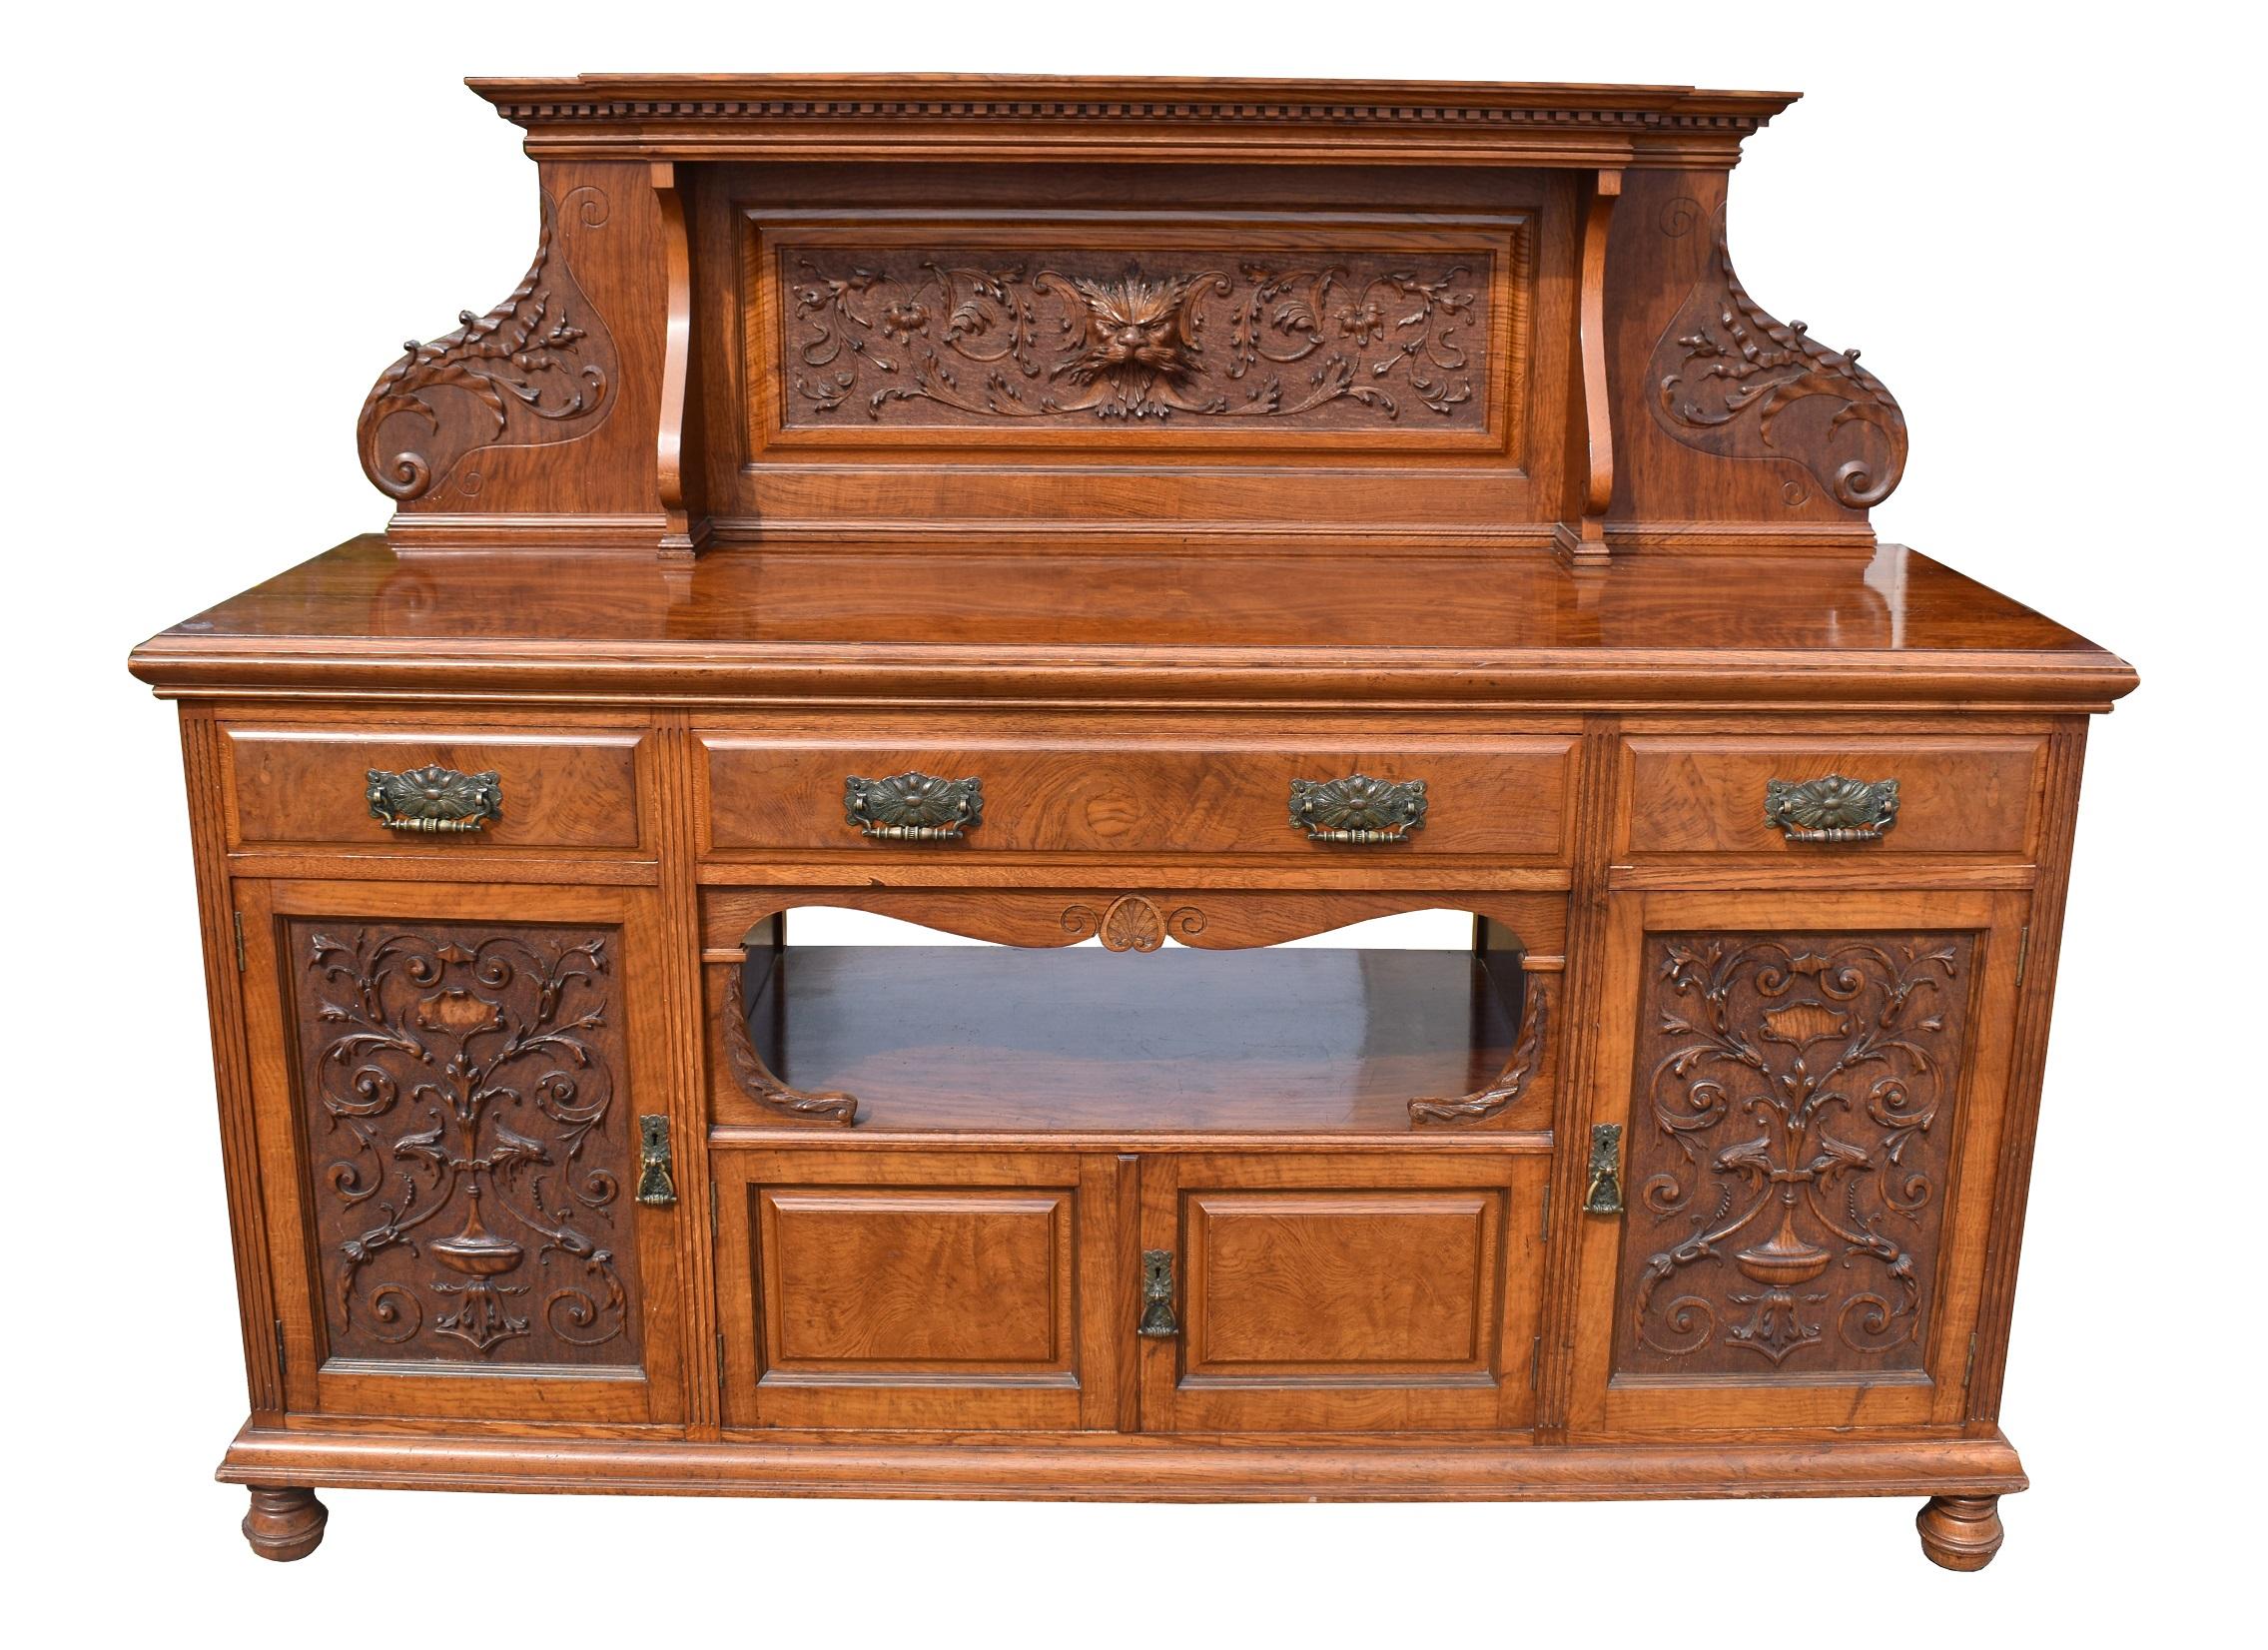 For sale is a good quality Victorian Pollard oak sideboard, the top with a carved pediment, above three drawers, each with brass handles. The base has two large cupboards with carved panels, as well as a shelf with a small cupboard below. The